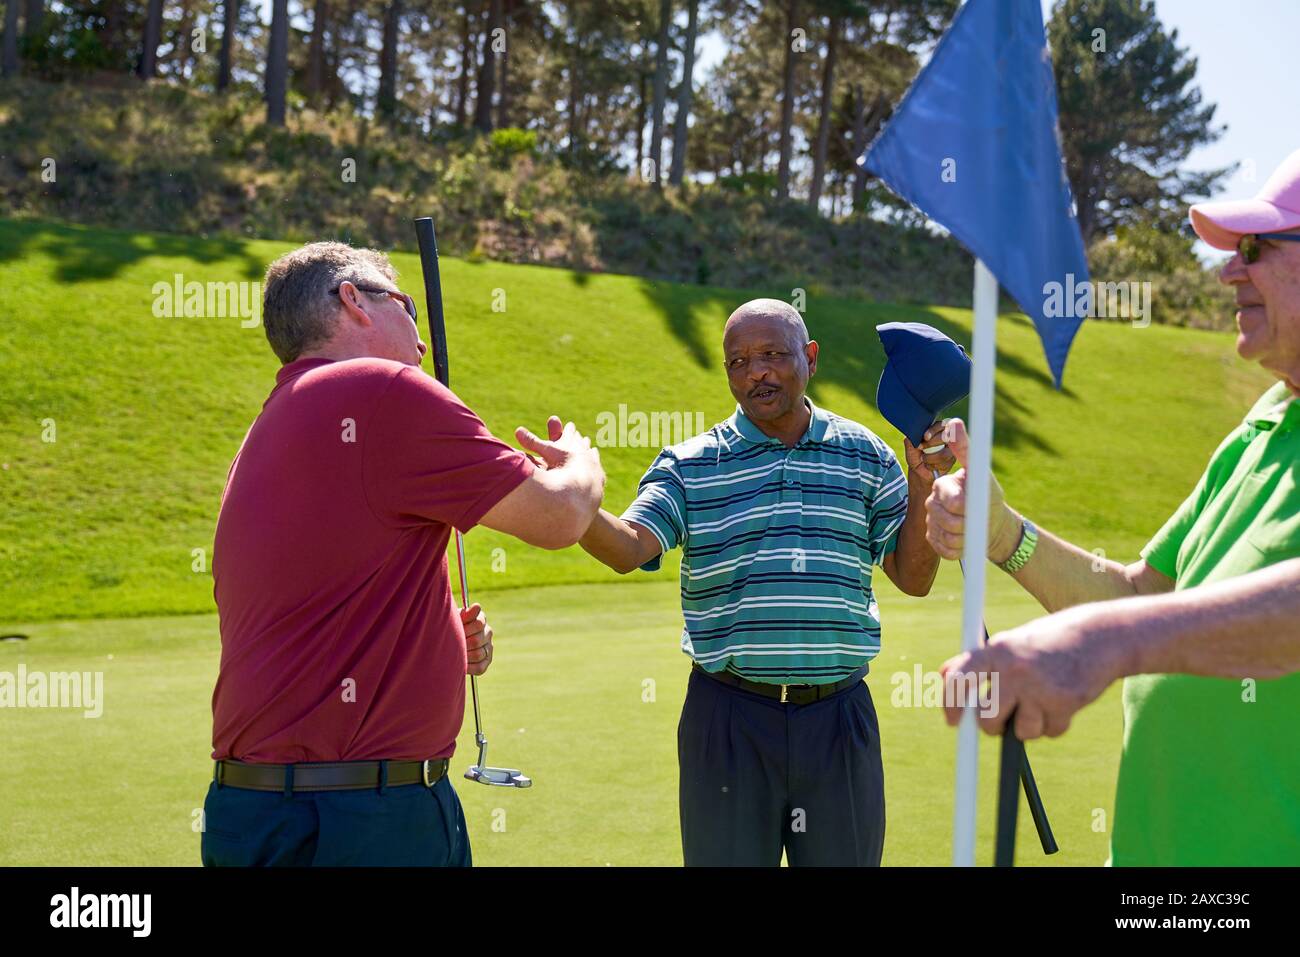 Male golfers shaking hands at pin on sunny golf course Stock Photo